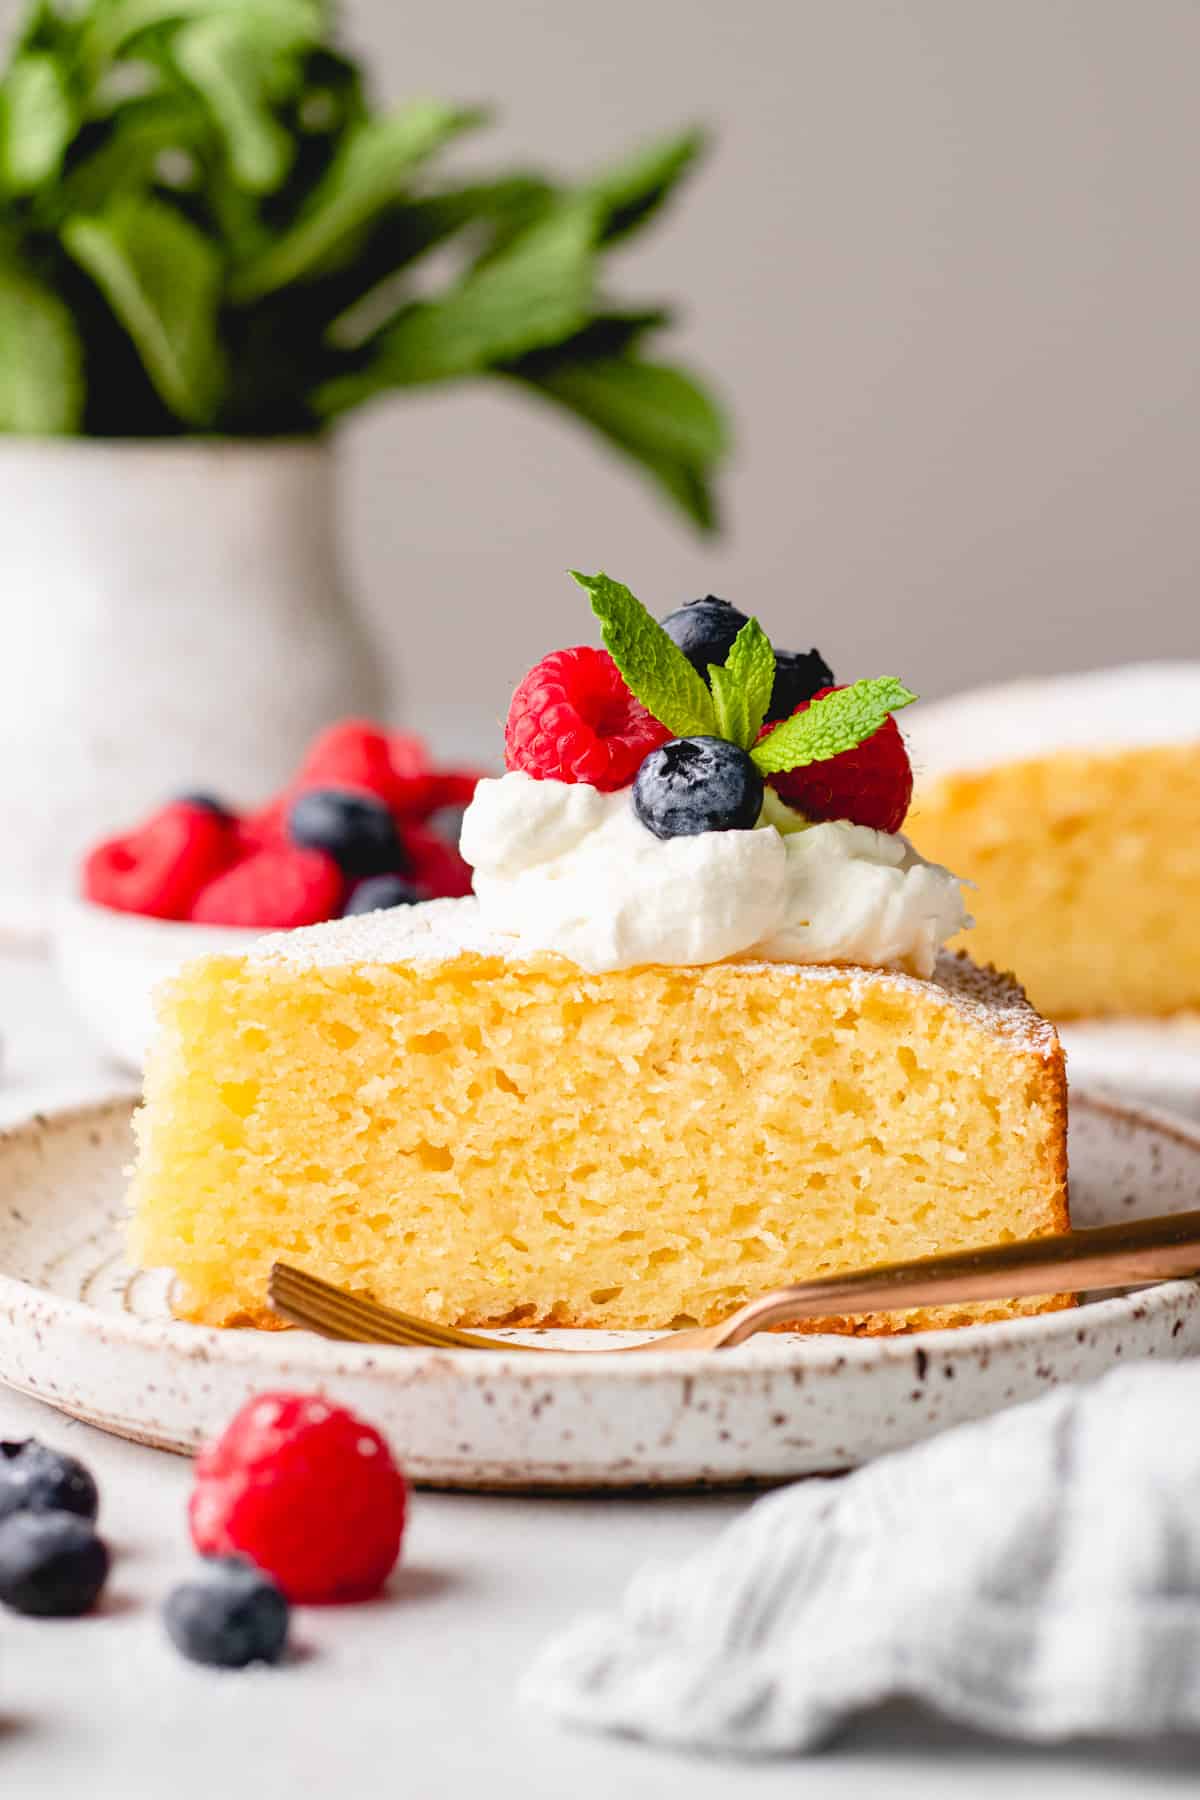 A slice of Italian Lemon Ricotta Cake on a plate with a fork and fresh berries.